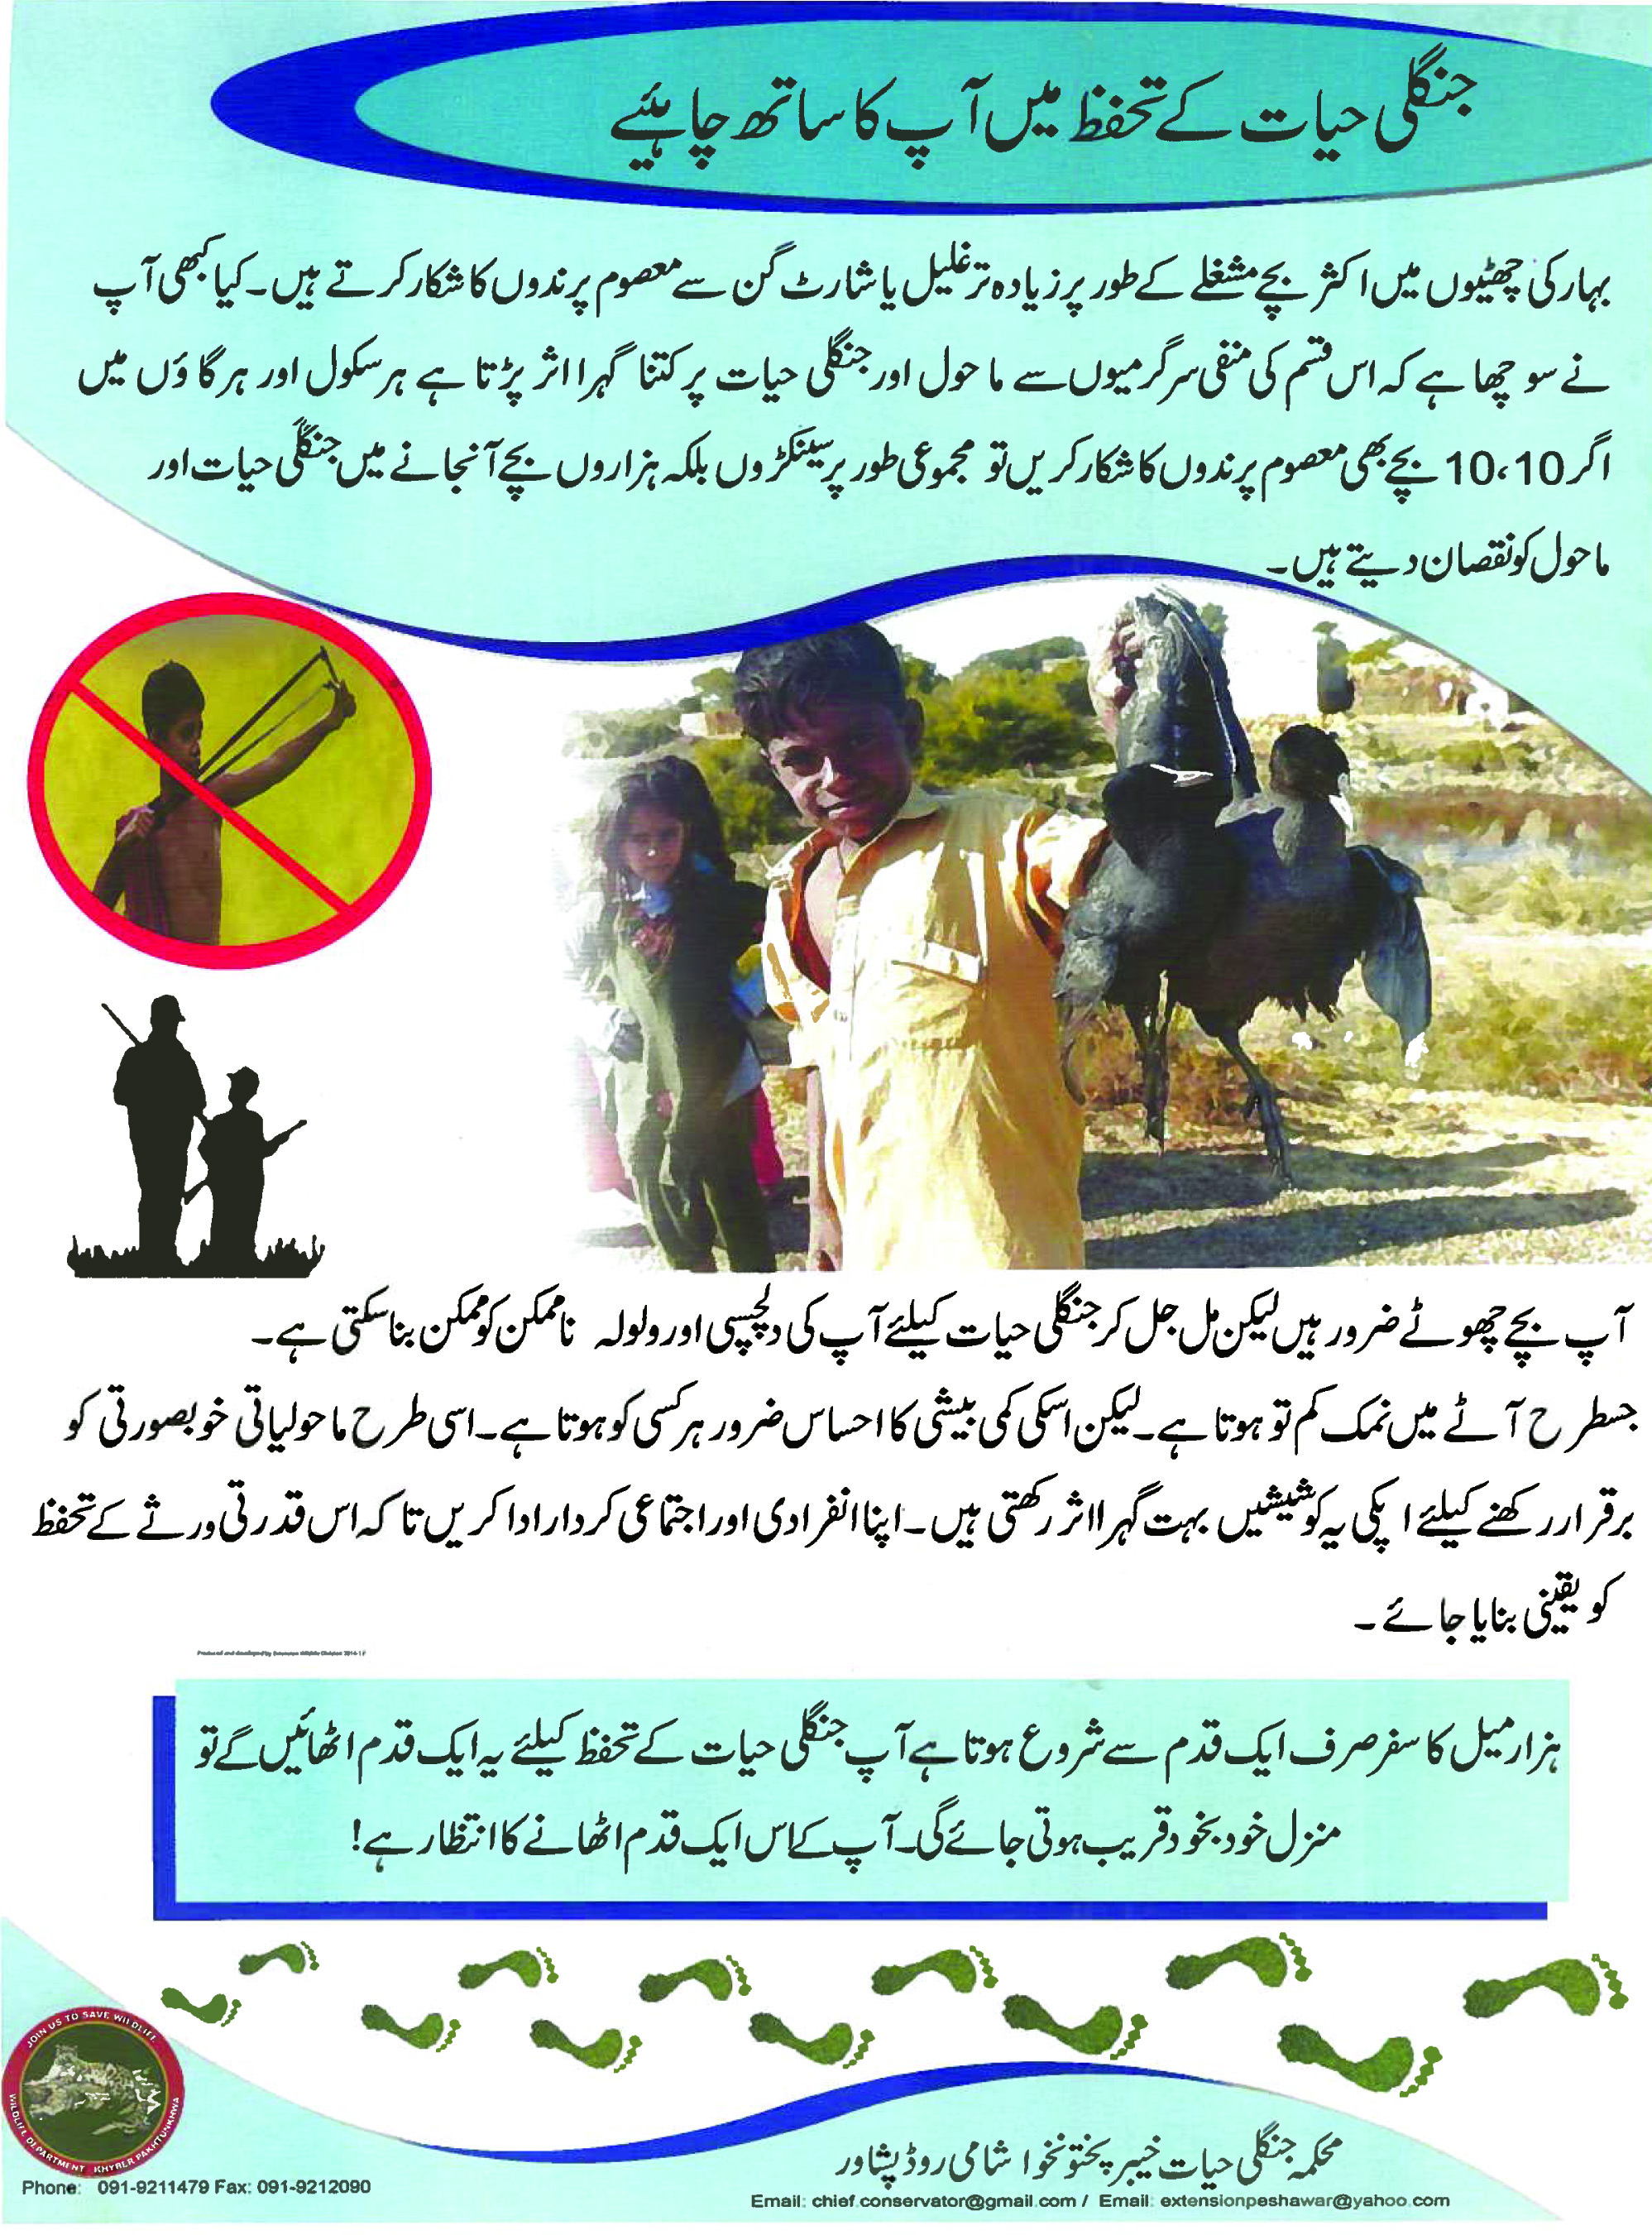 A poster published by Wildlife Department of Khyber Pakhtunkwha to raise awareness among youngsters, especially of rural settlements, about damage of hunting to birds population in the province.